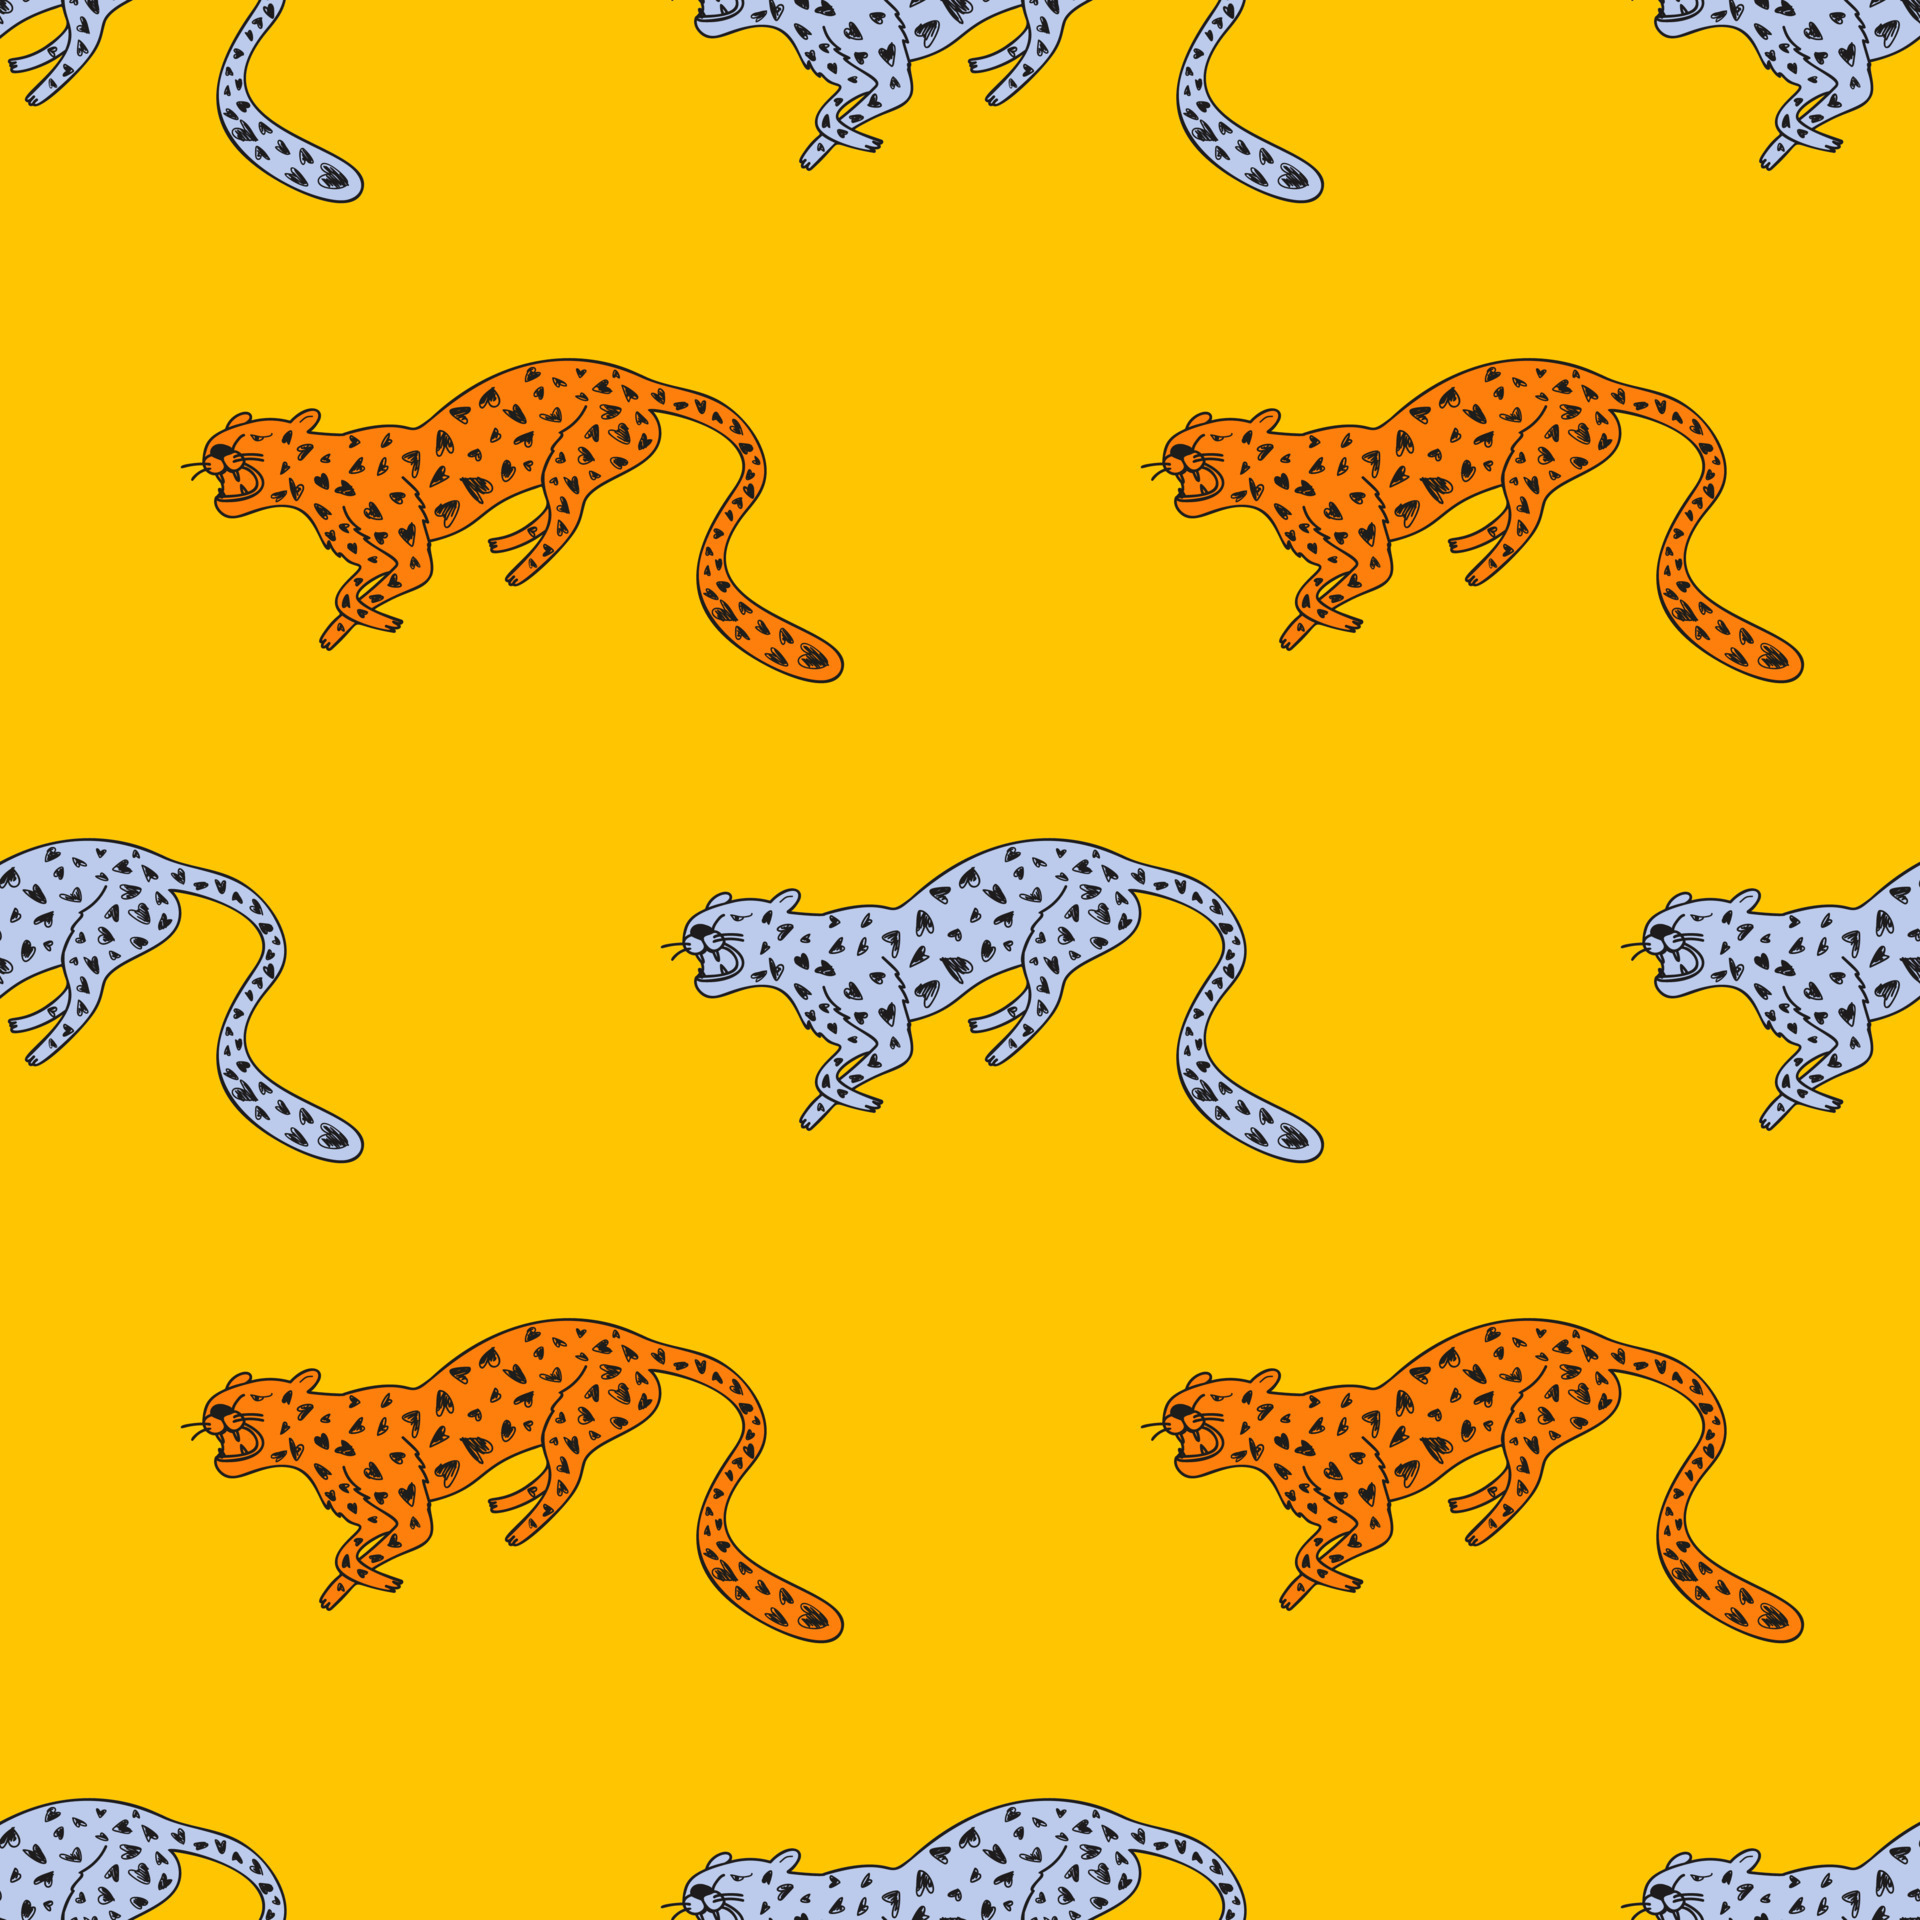 Leopards are walking on a yellow background - Doodles